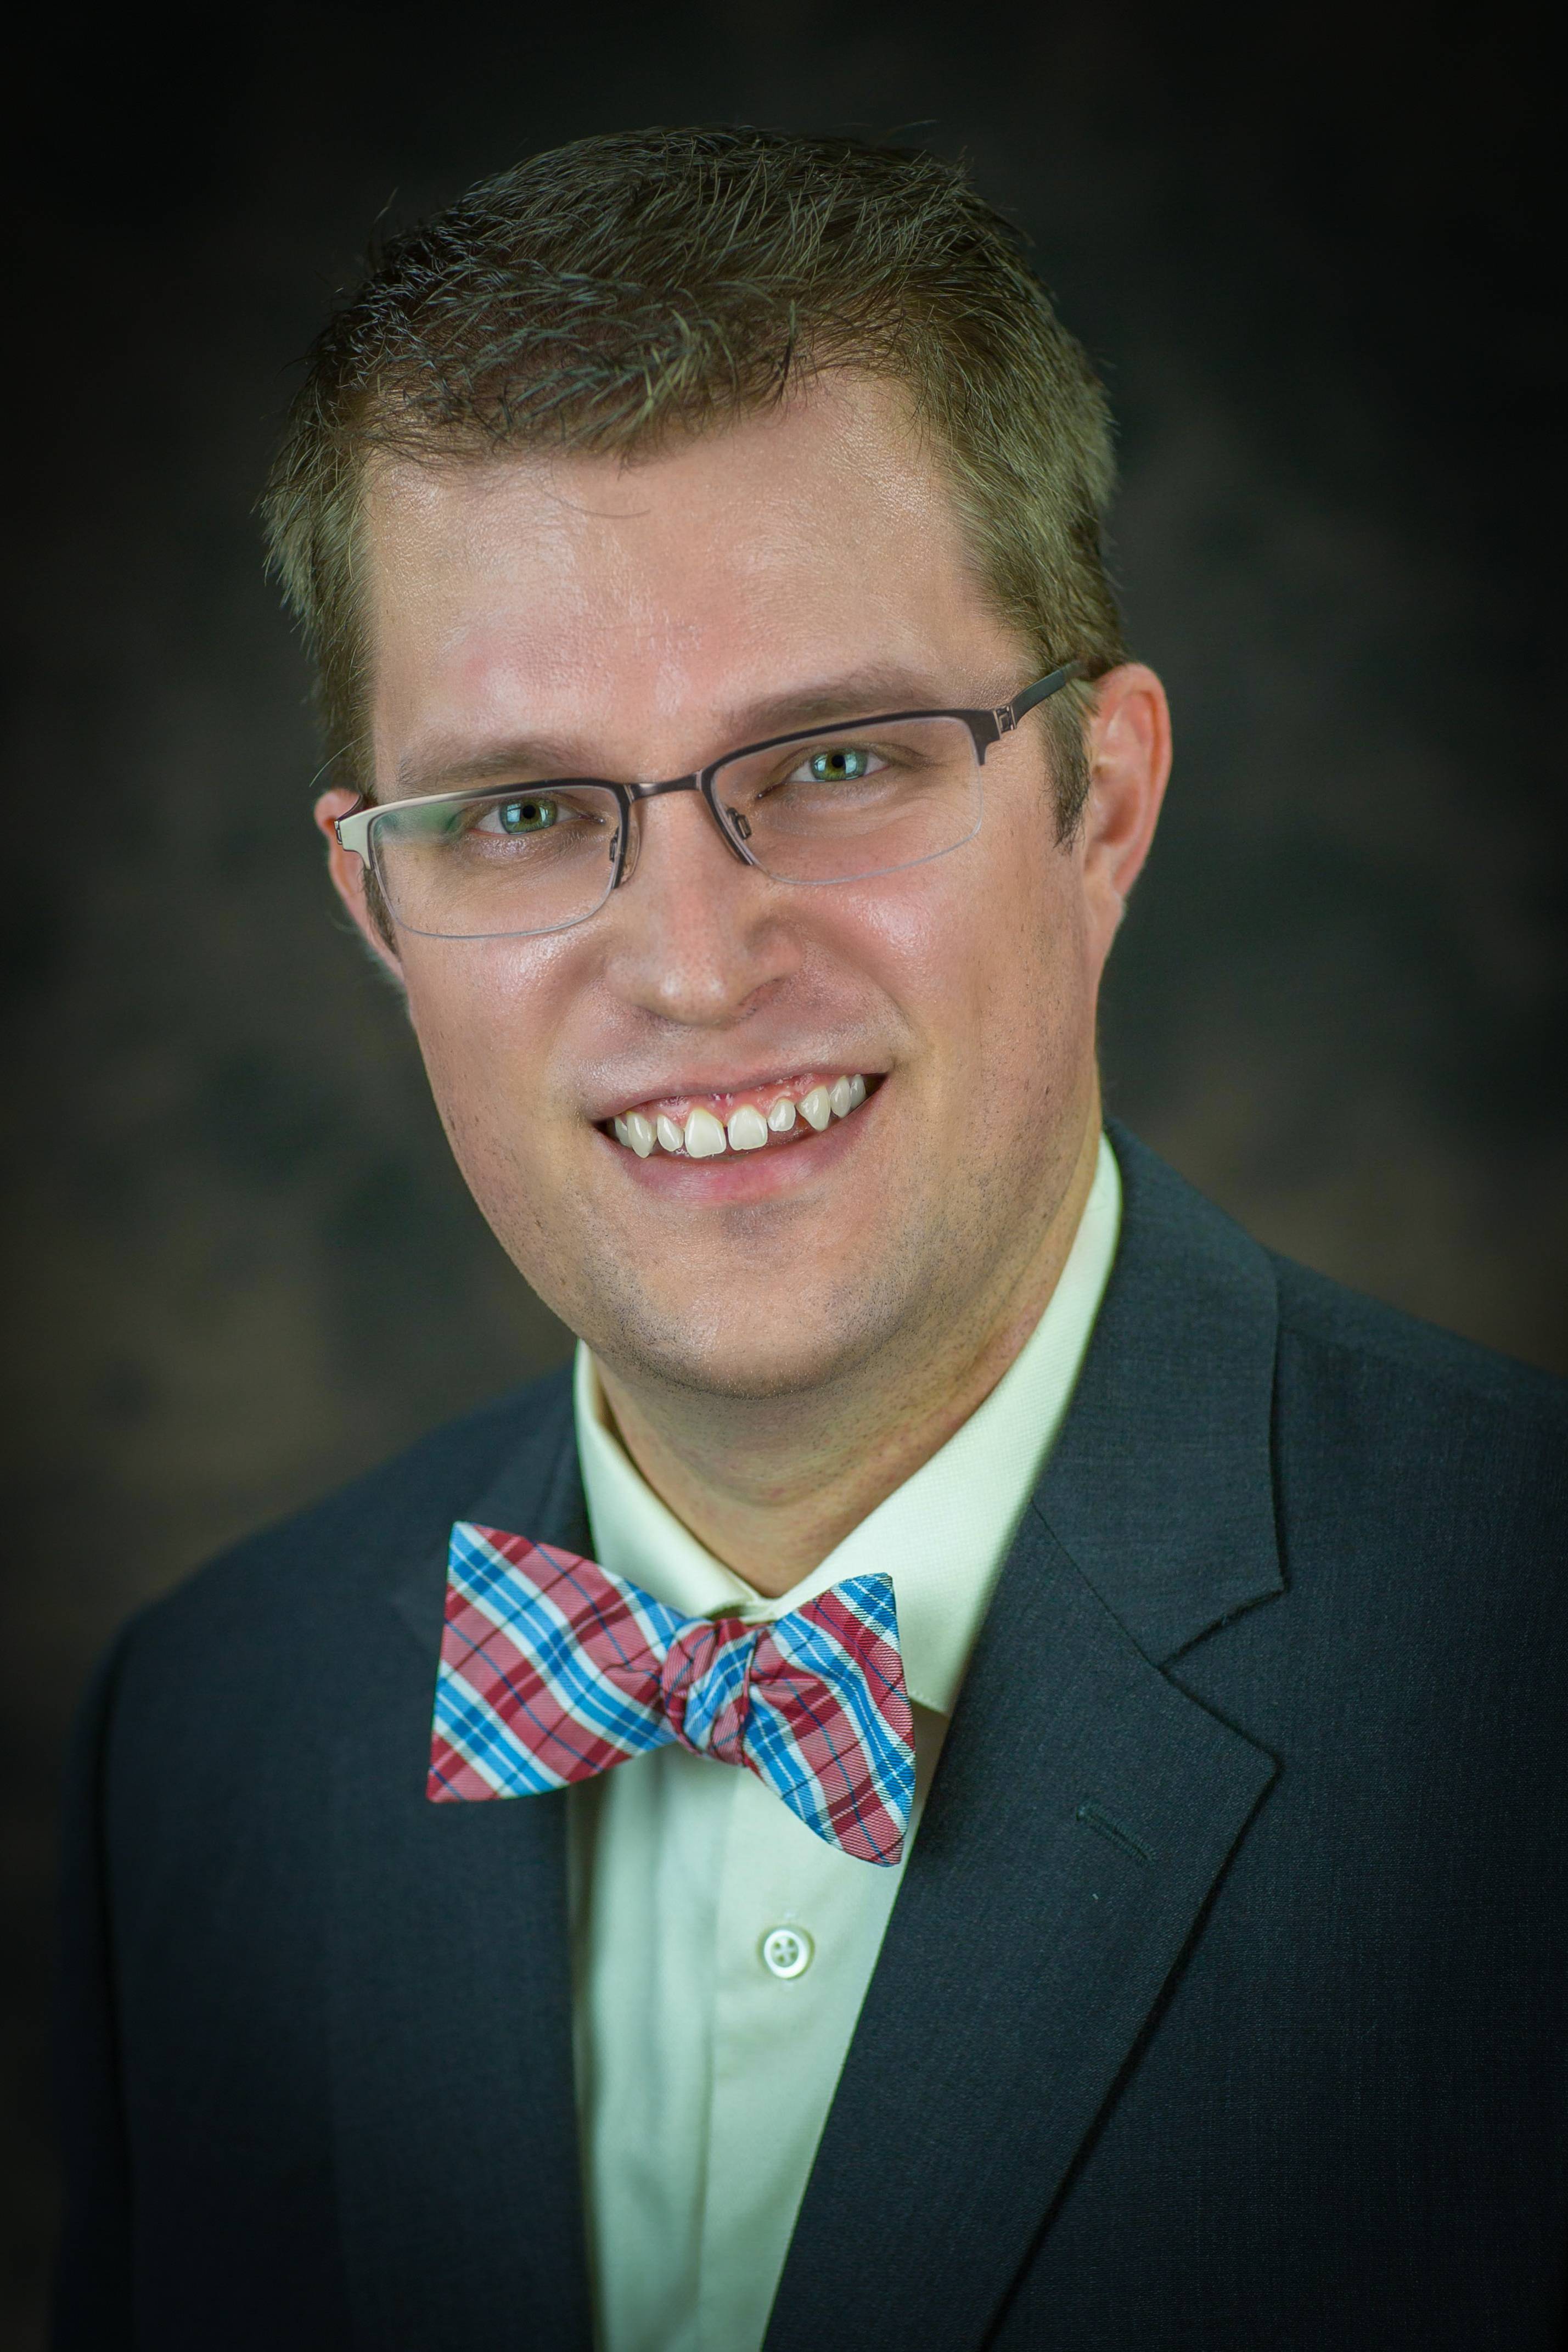 A smiling man wearing a suit jacket with a plaid bow tie.